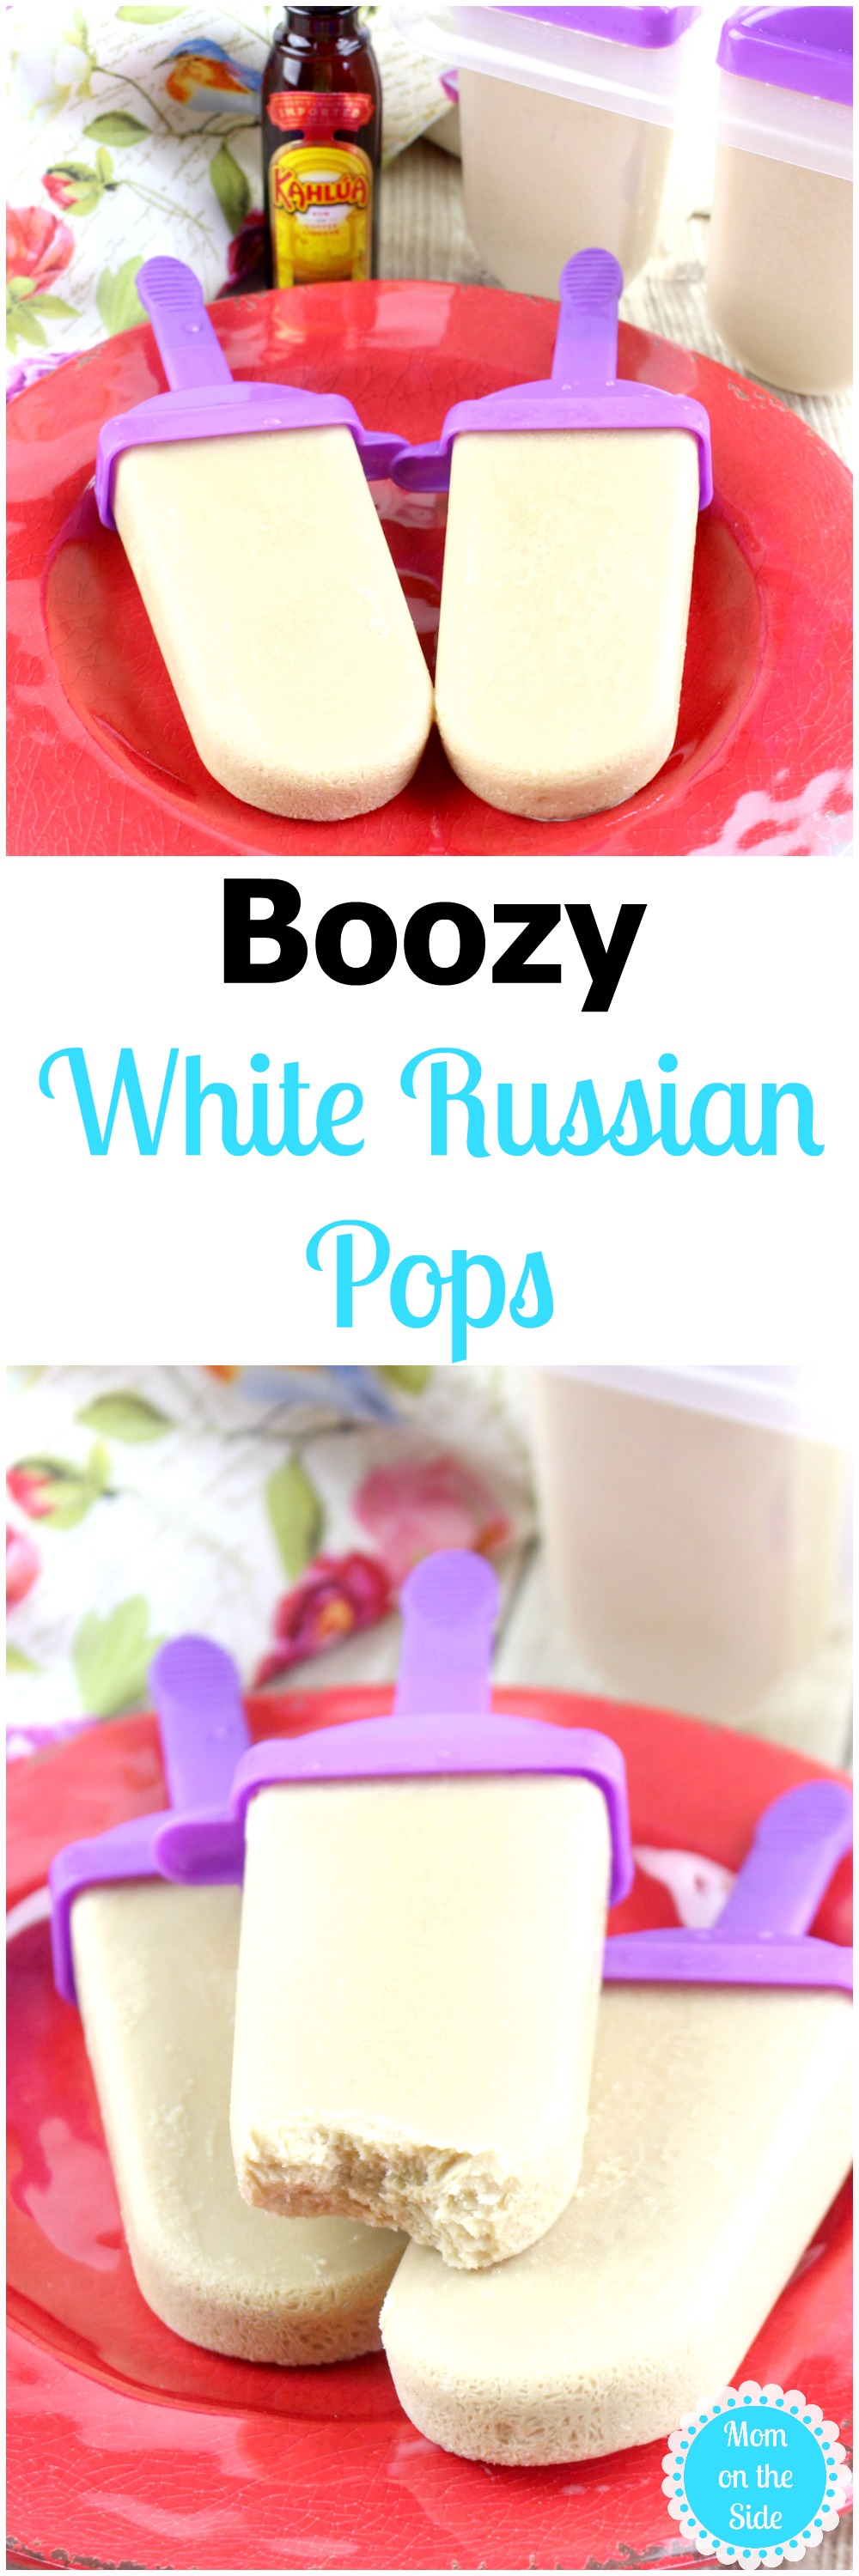 Delicious Boozy White Russian Pops for Adults